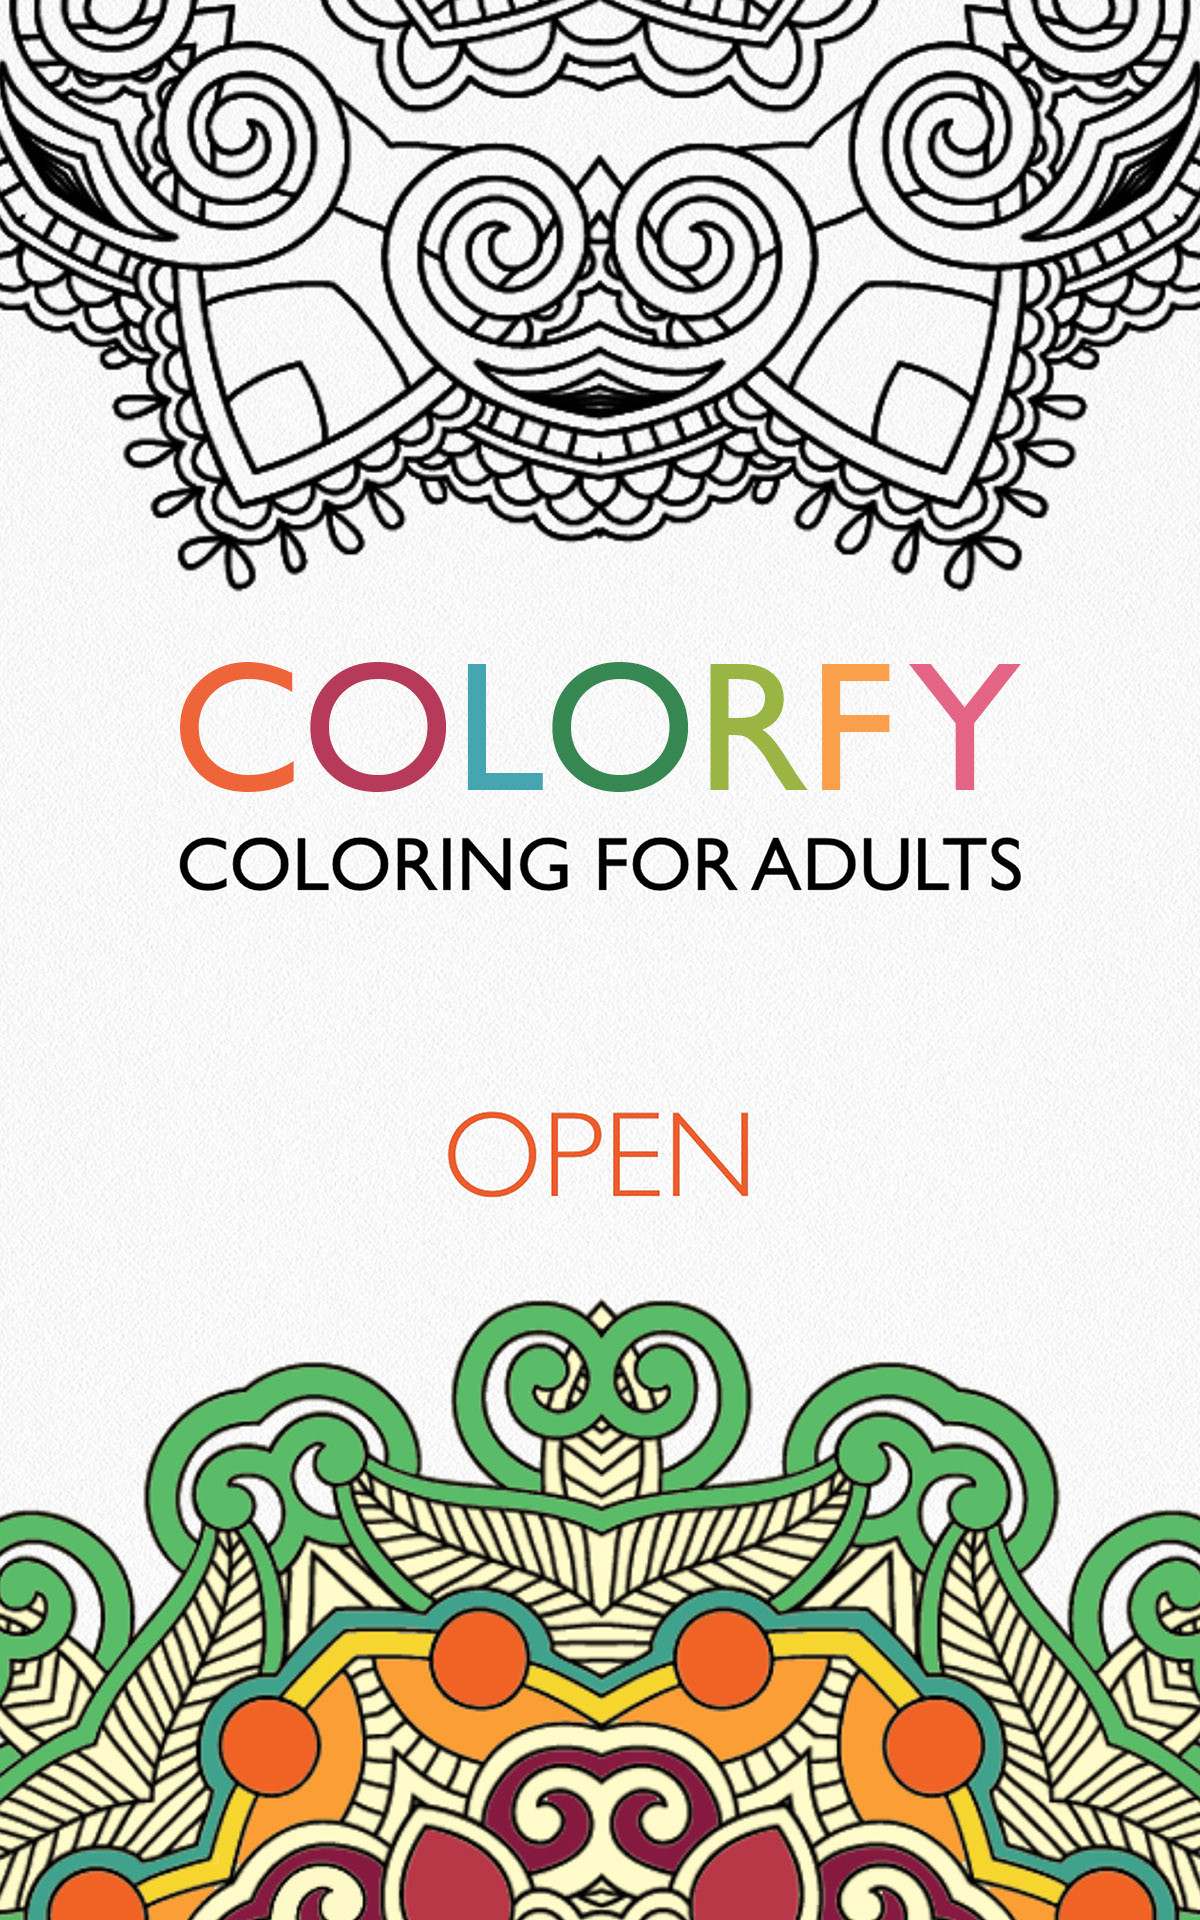 Coloring Book Apps For Adults
 Amazon Colorfy Coloring Book for Adults Free